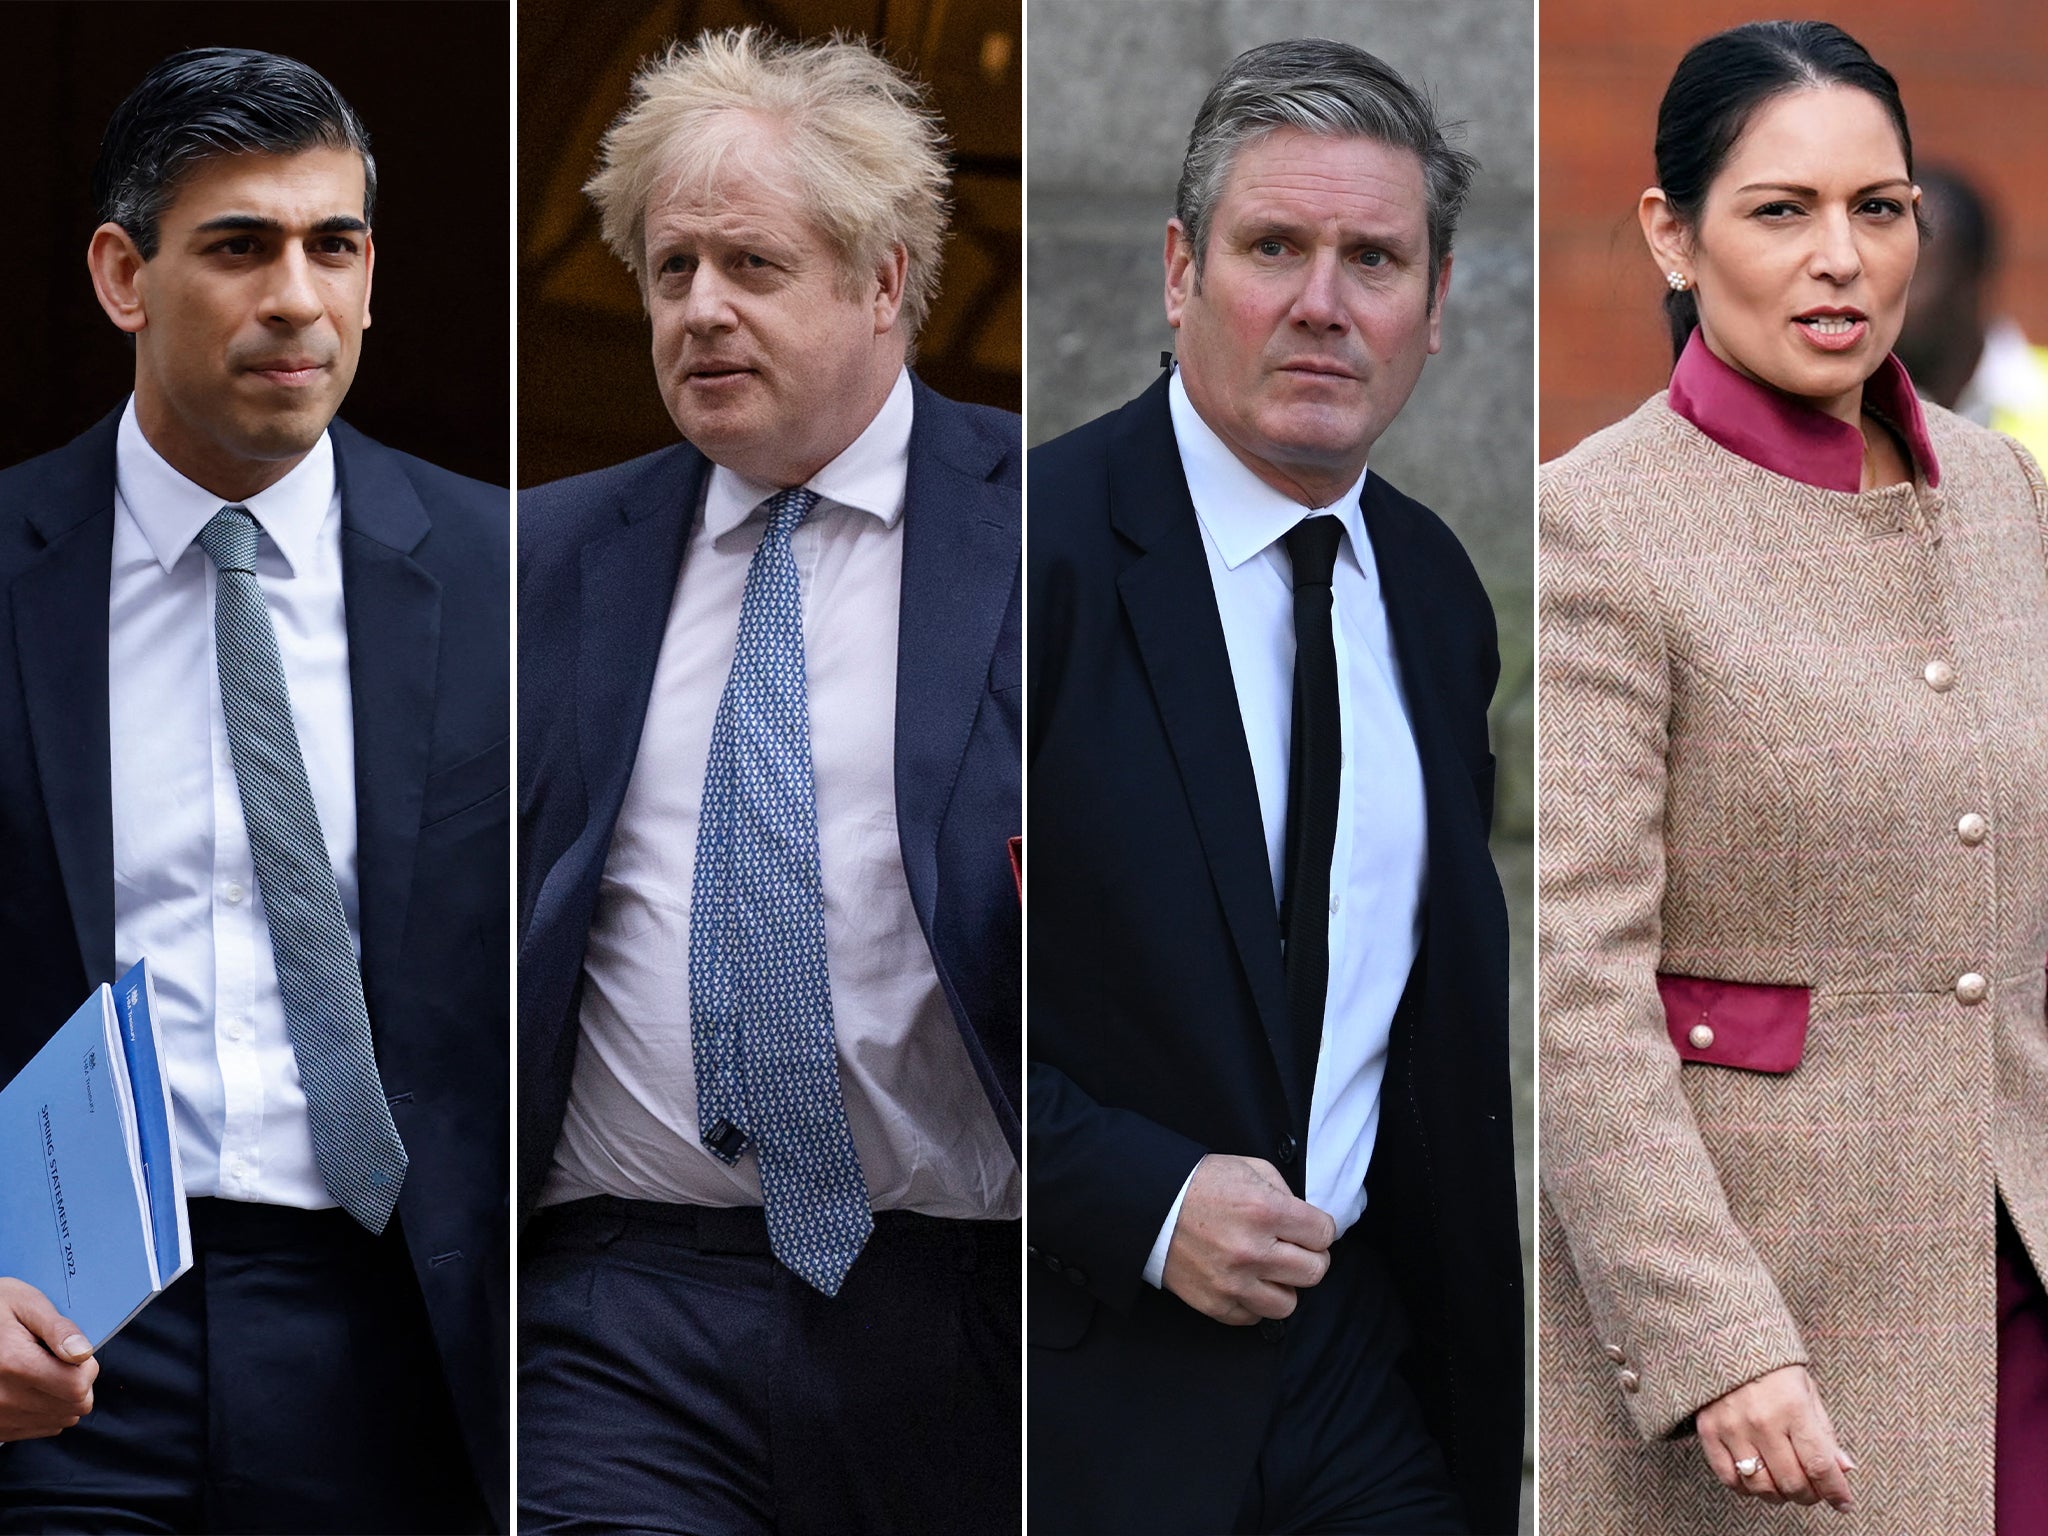 According to the polls, the least unpopular politicians are Keir Starmer and Ben Wallace, while Priti Patel comes out worst